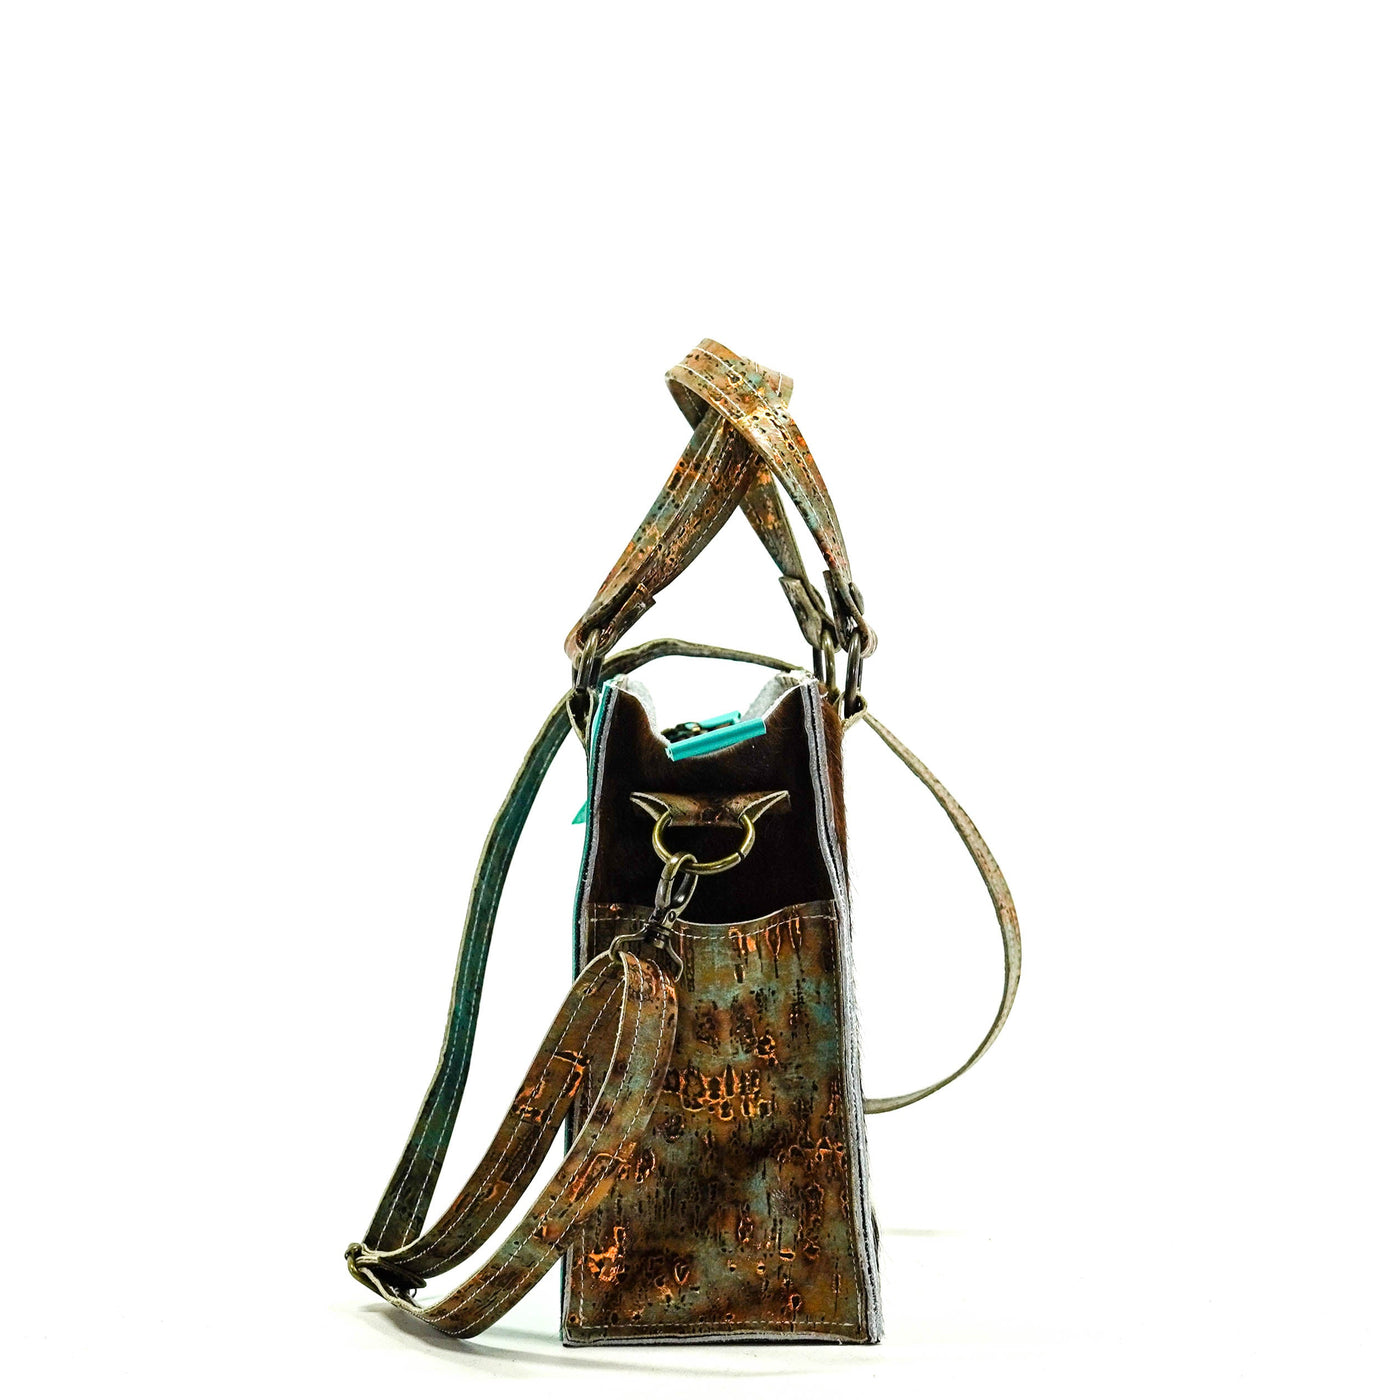 Minnie Pearl - Tricolor w/ Patina Driftwood-Minnie Pearl-Western-Cowhide-Bags-Handmade-Products-Gifts-Dancing Cactus Designs